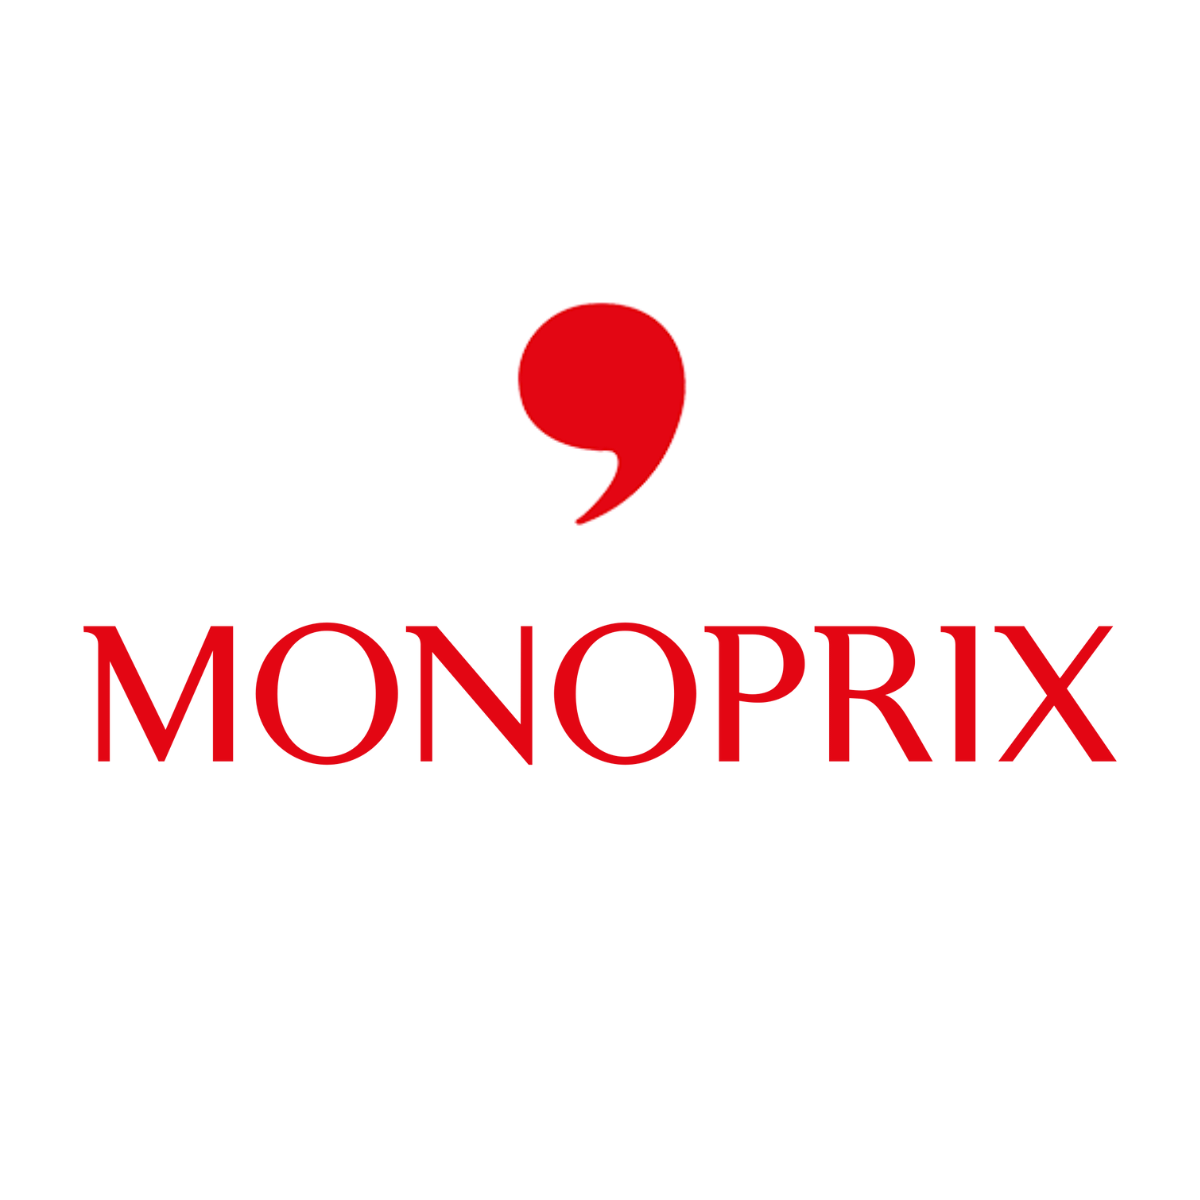 We creat a special RFID solution for Monoprix